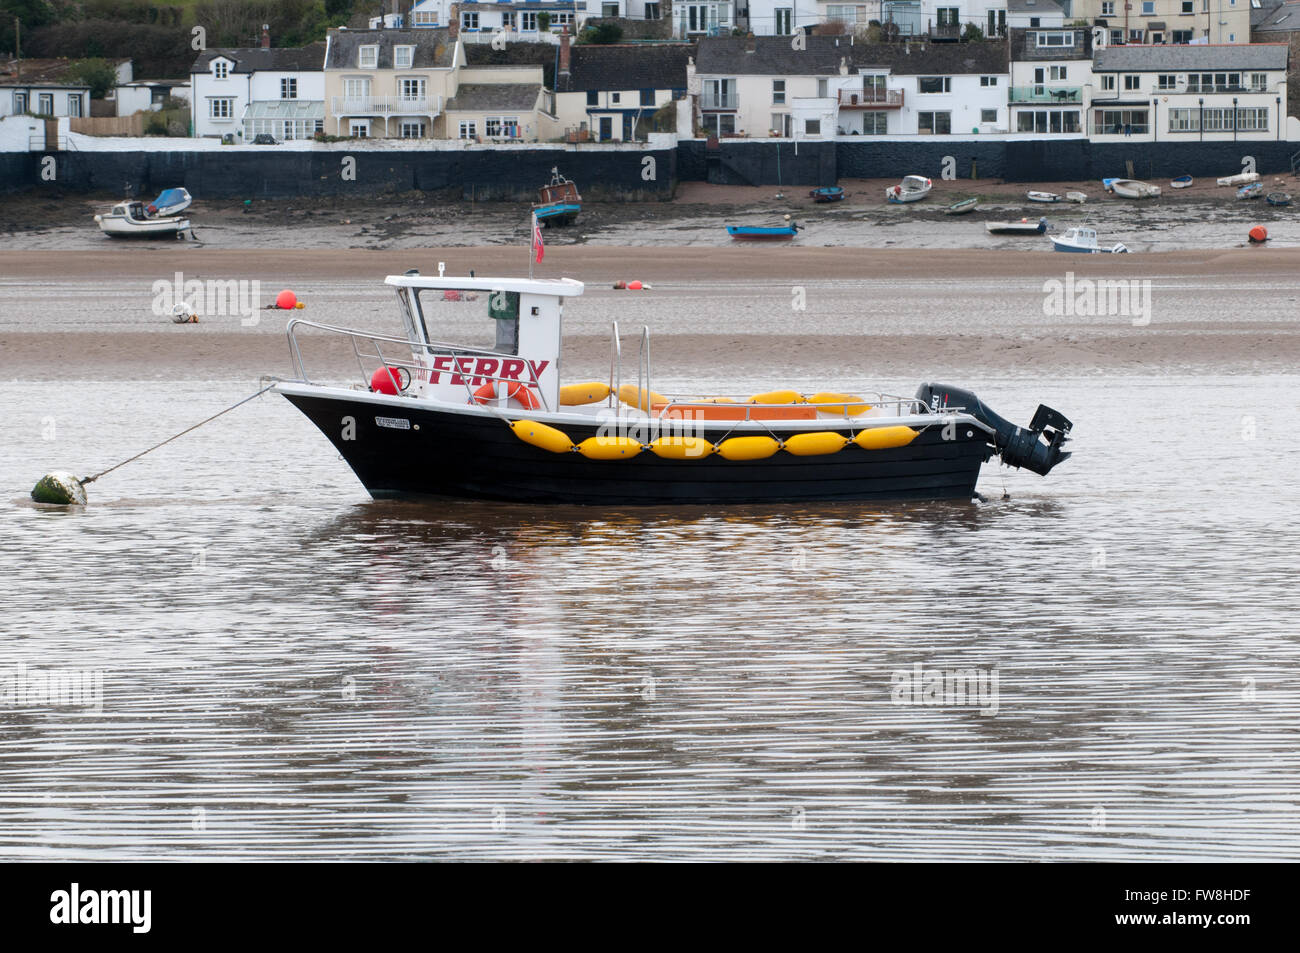 Passenger ferry moored in the river during low tide Stock Photo